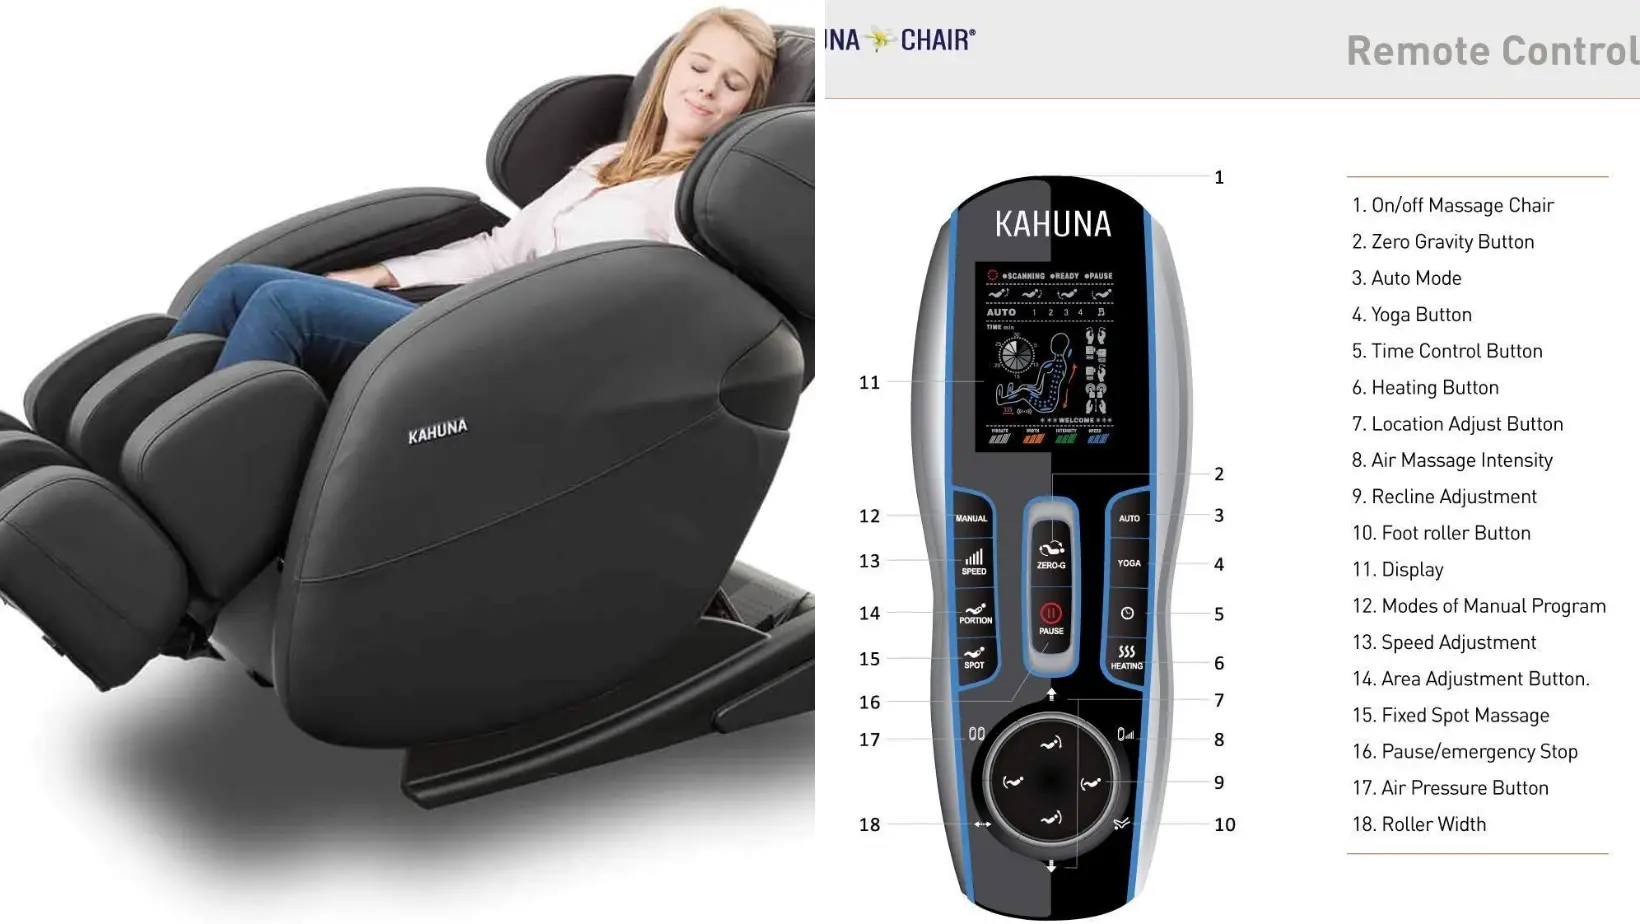 Kahuna Massage Chair LM-6800 Review 2022